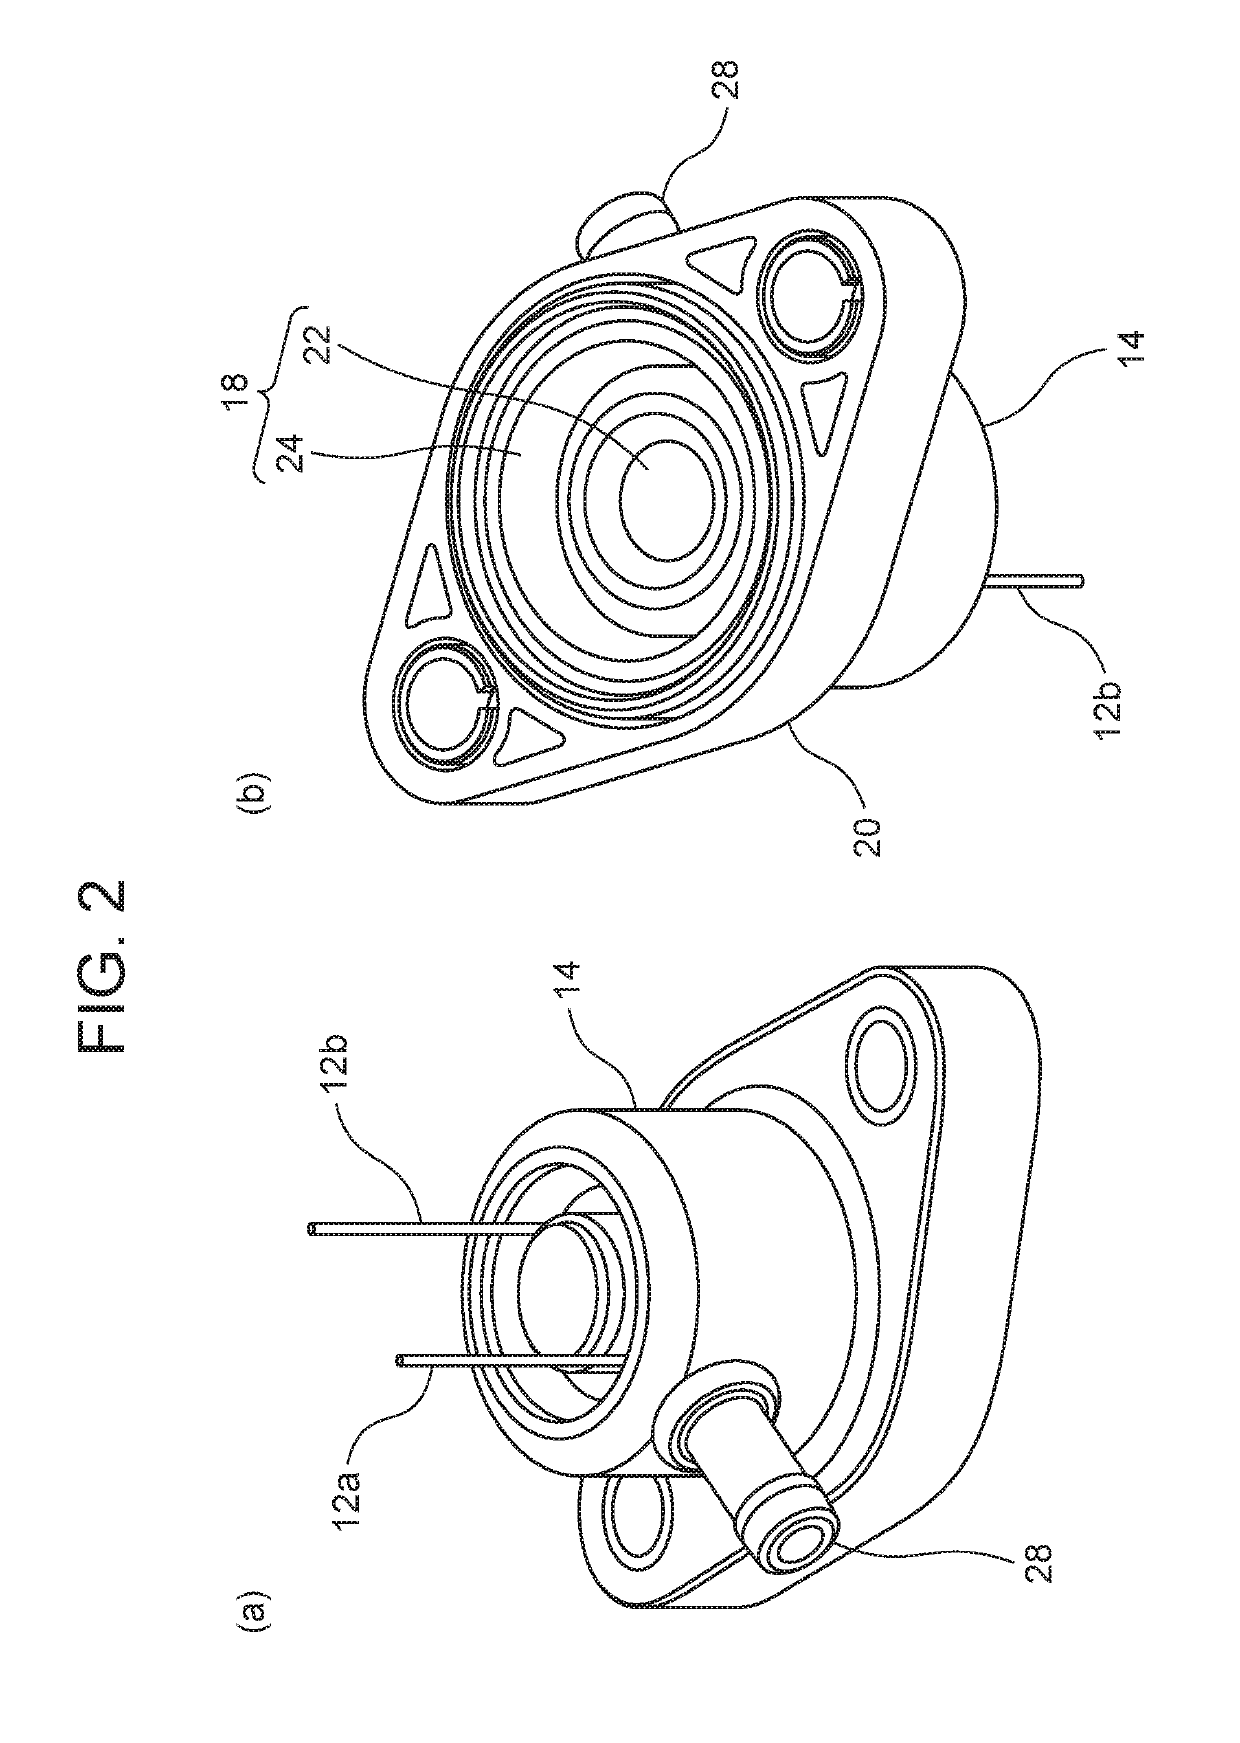 Heater device for heating liquefied gas